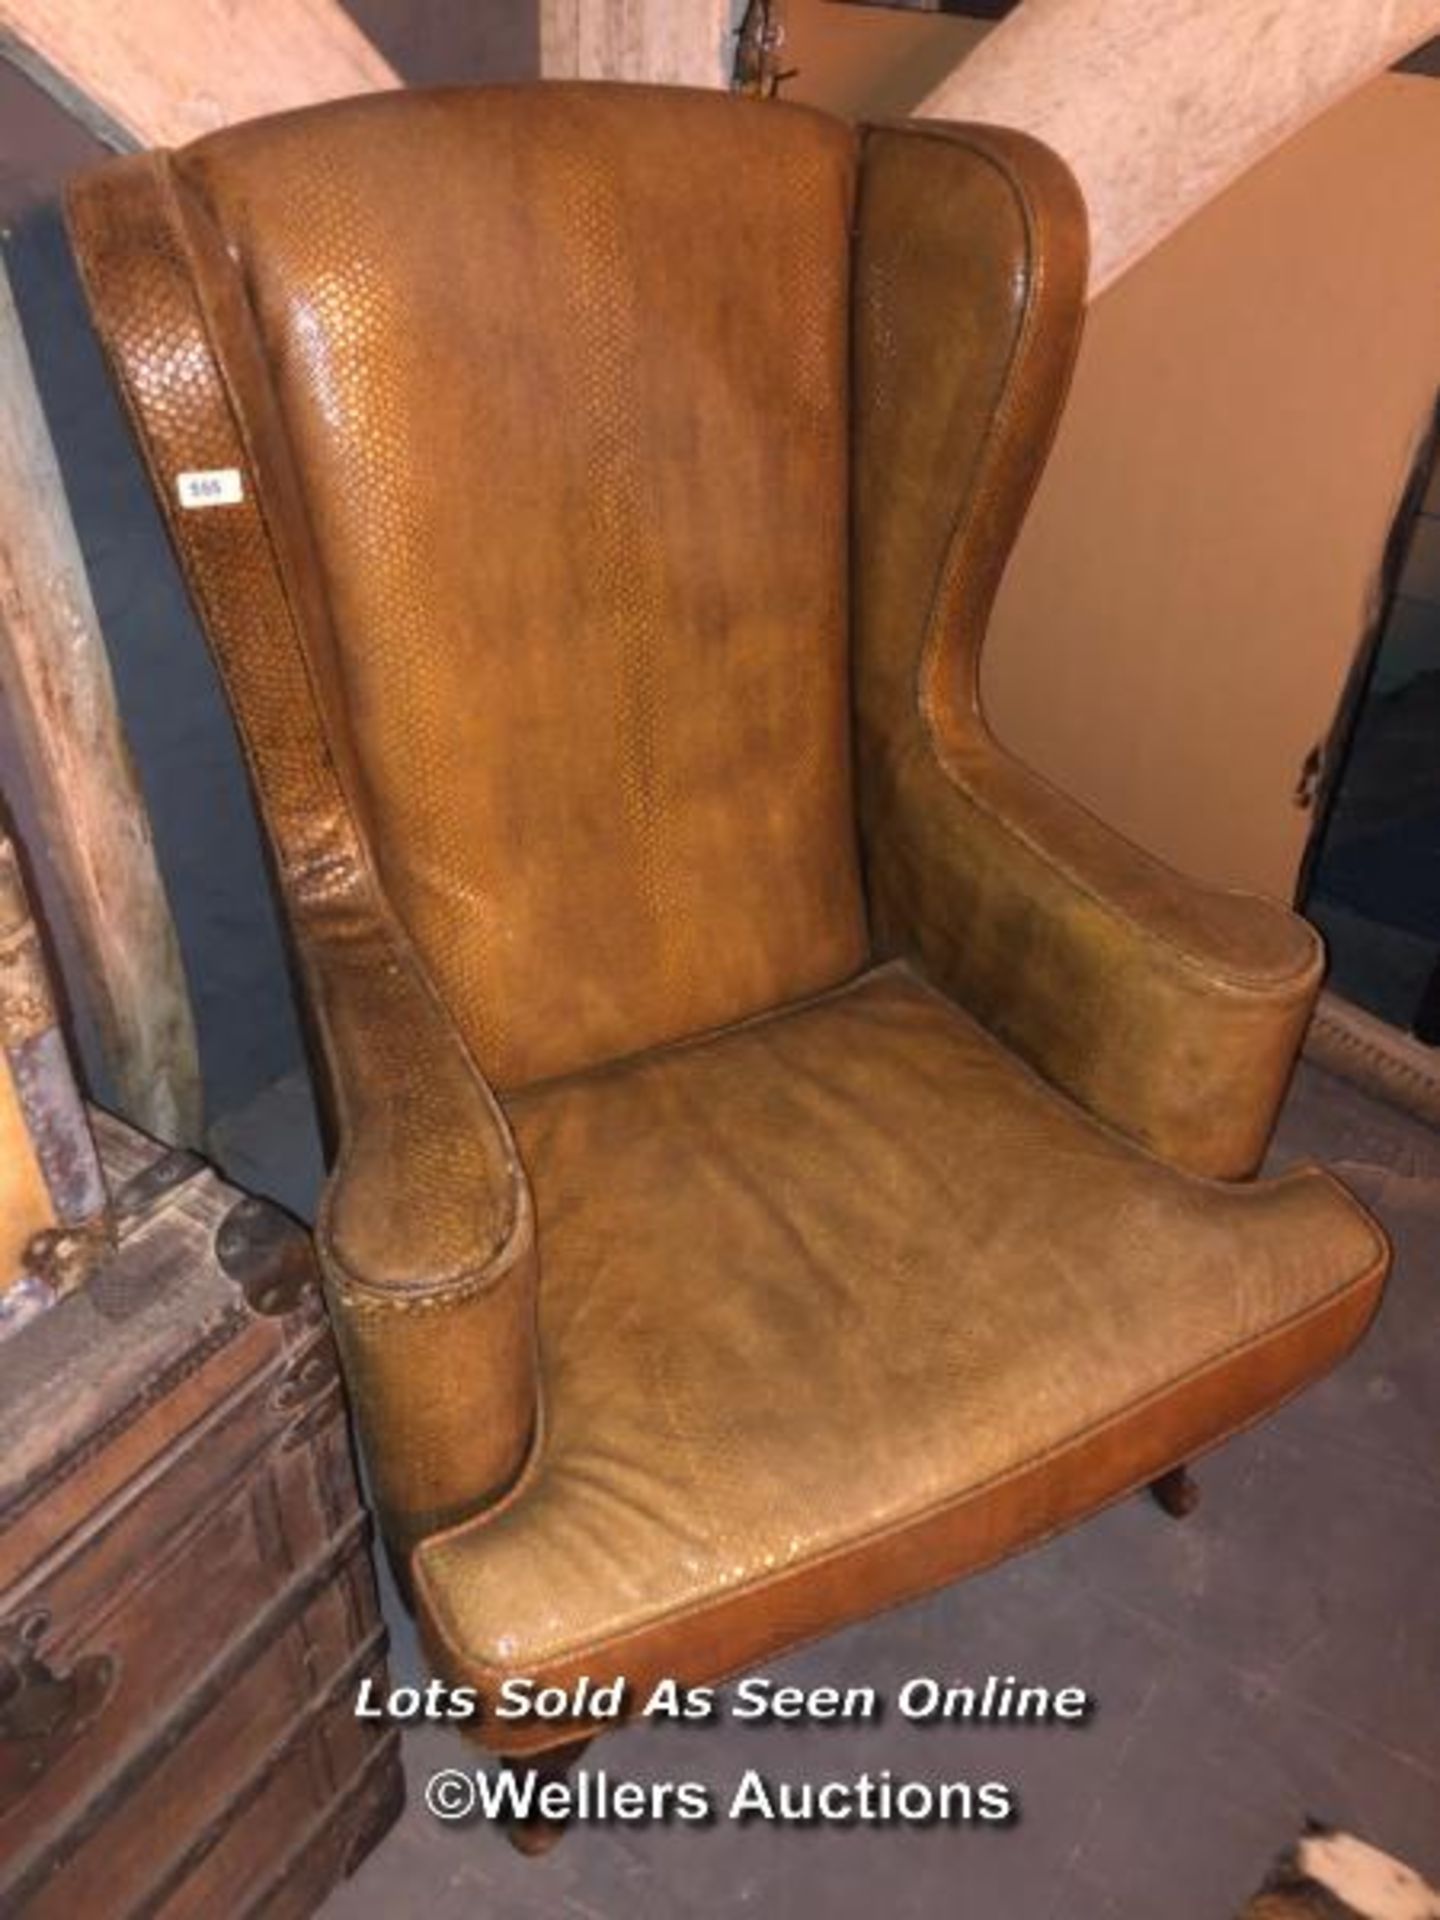 20TH CENTURY FAUX SNAKE SKIN LEATHER WING BACK CHAIR, CABRIOLE LEG, 74 X 65 X 110CM - Image 2 of 4